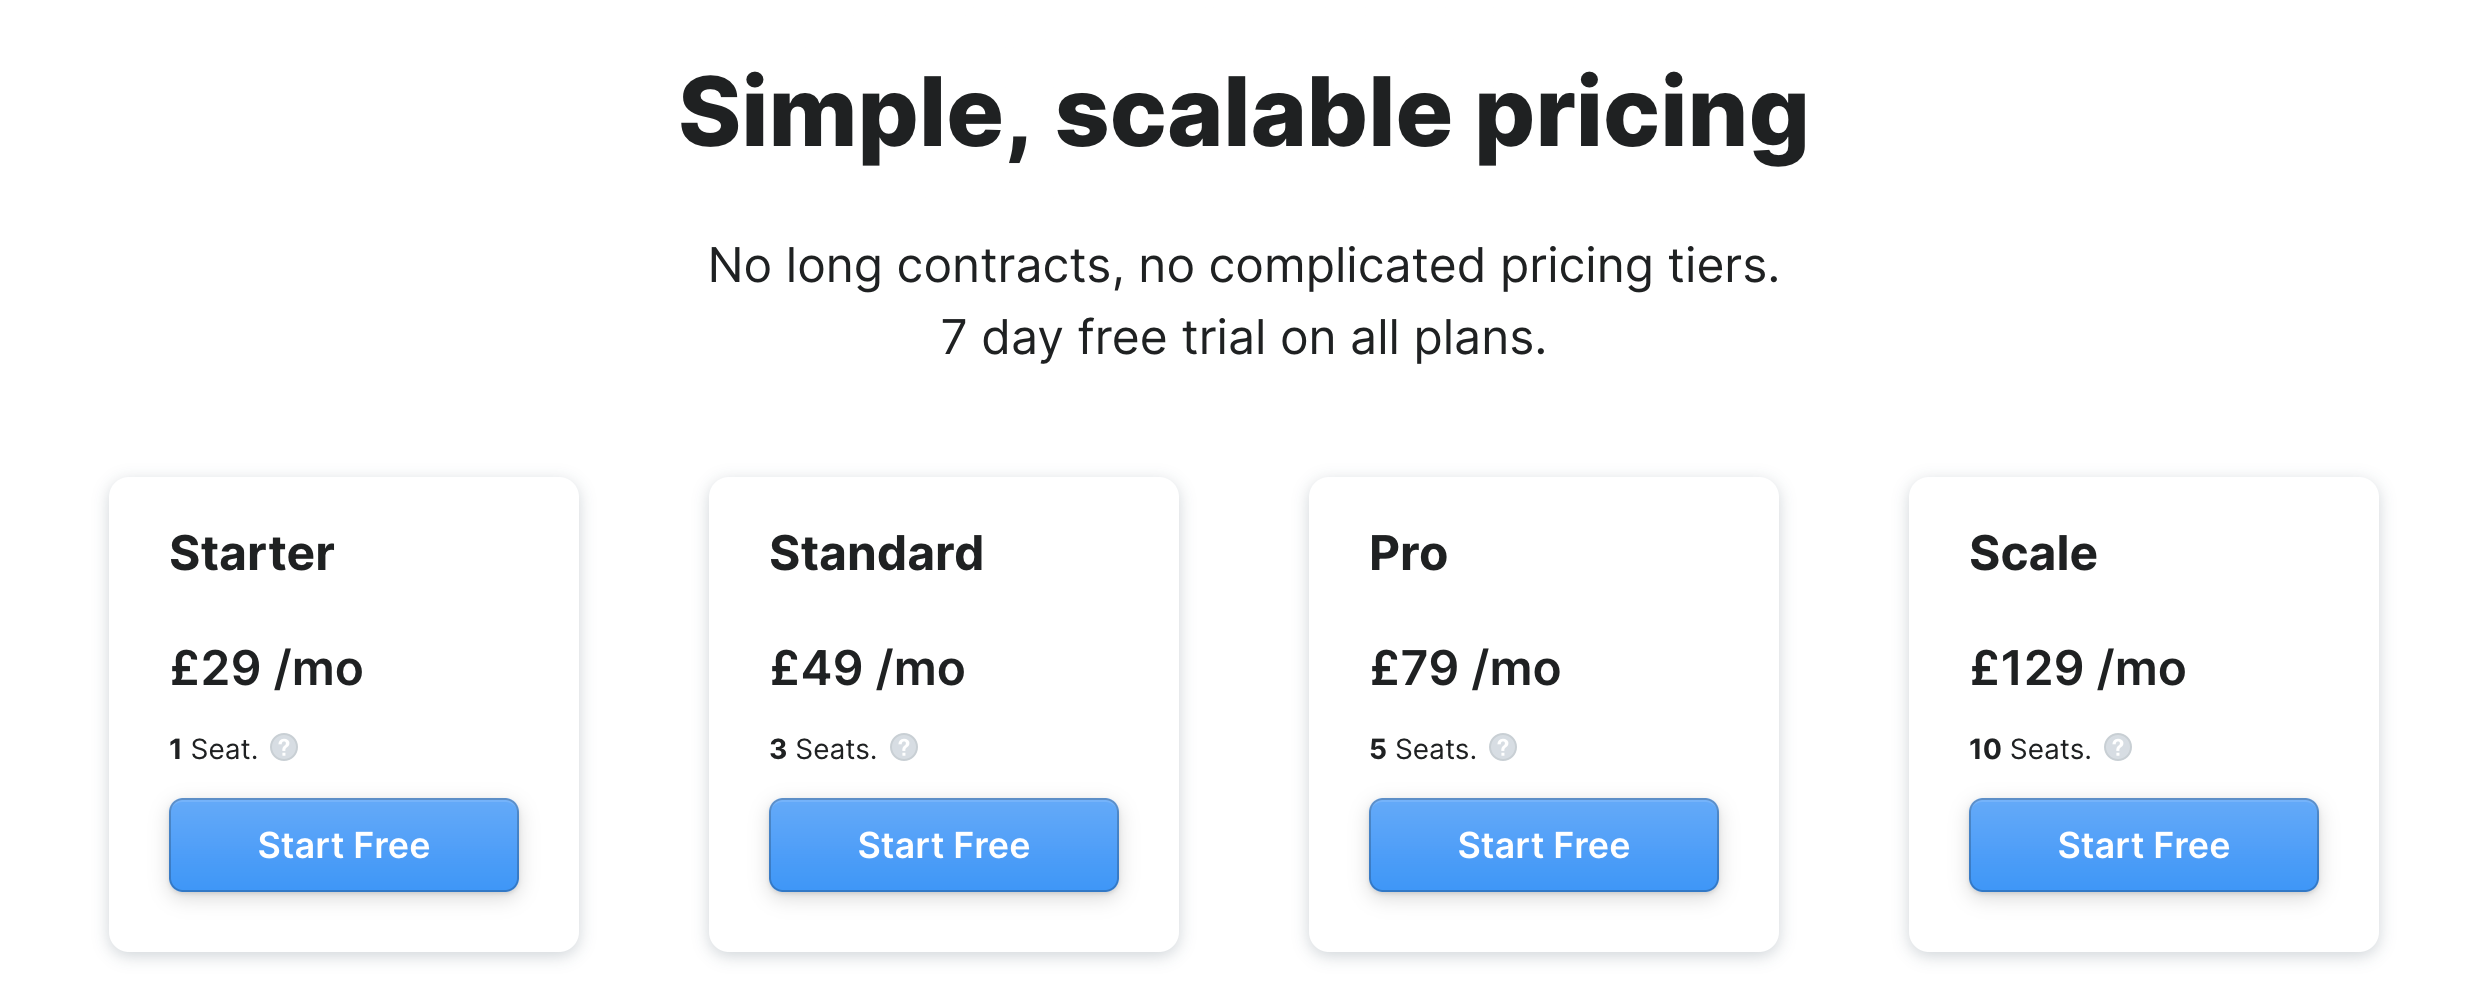 The benefits of simplified pricing